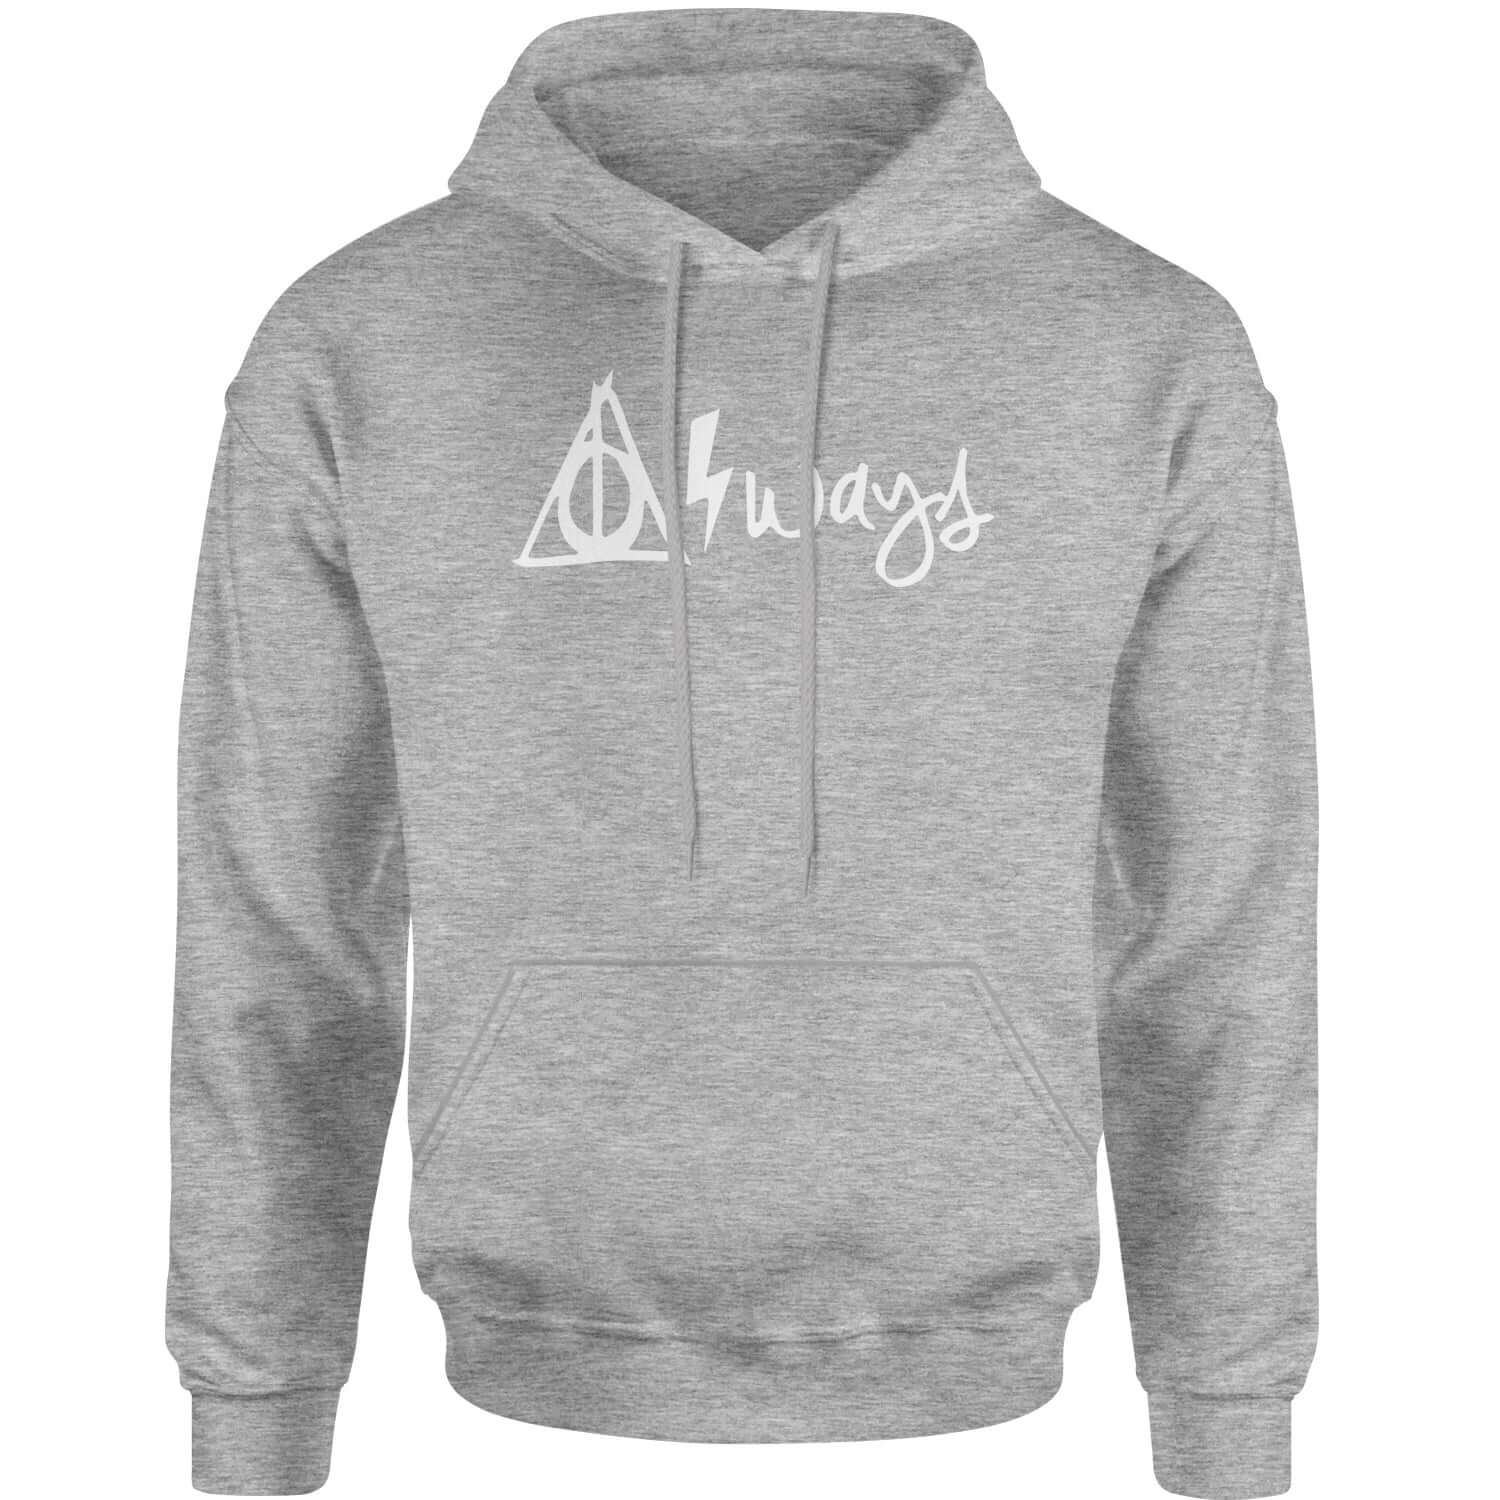 Always Lightning Bolt Adult Hoodie Sweatshirt #expressiontees by Expression Tees